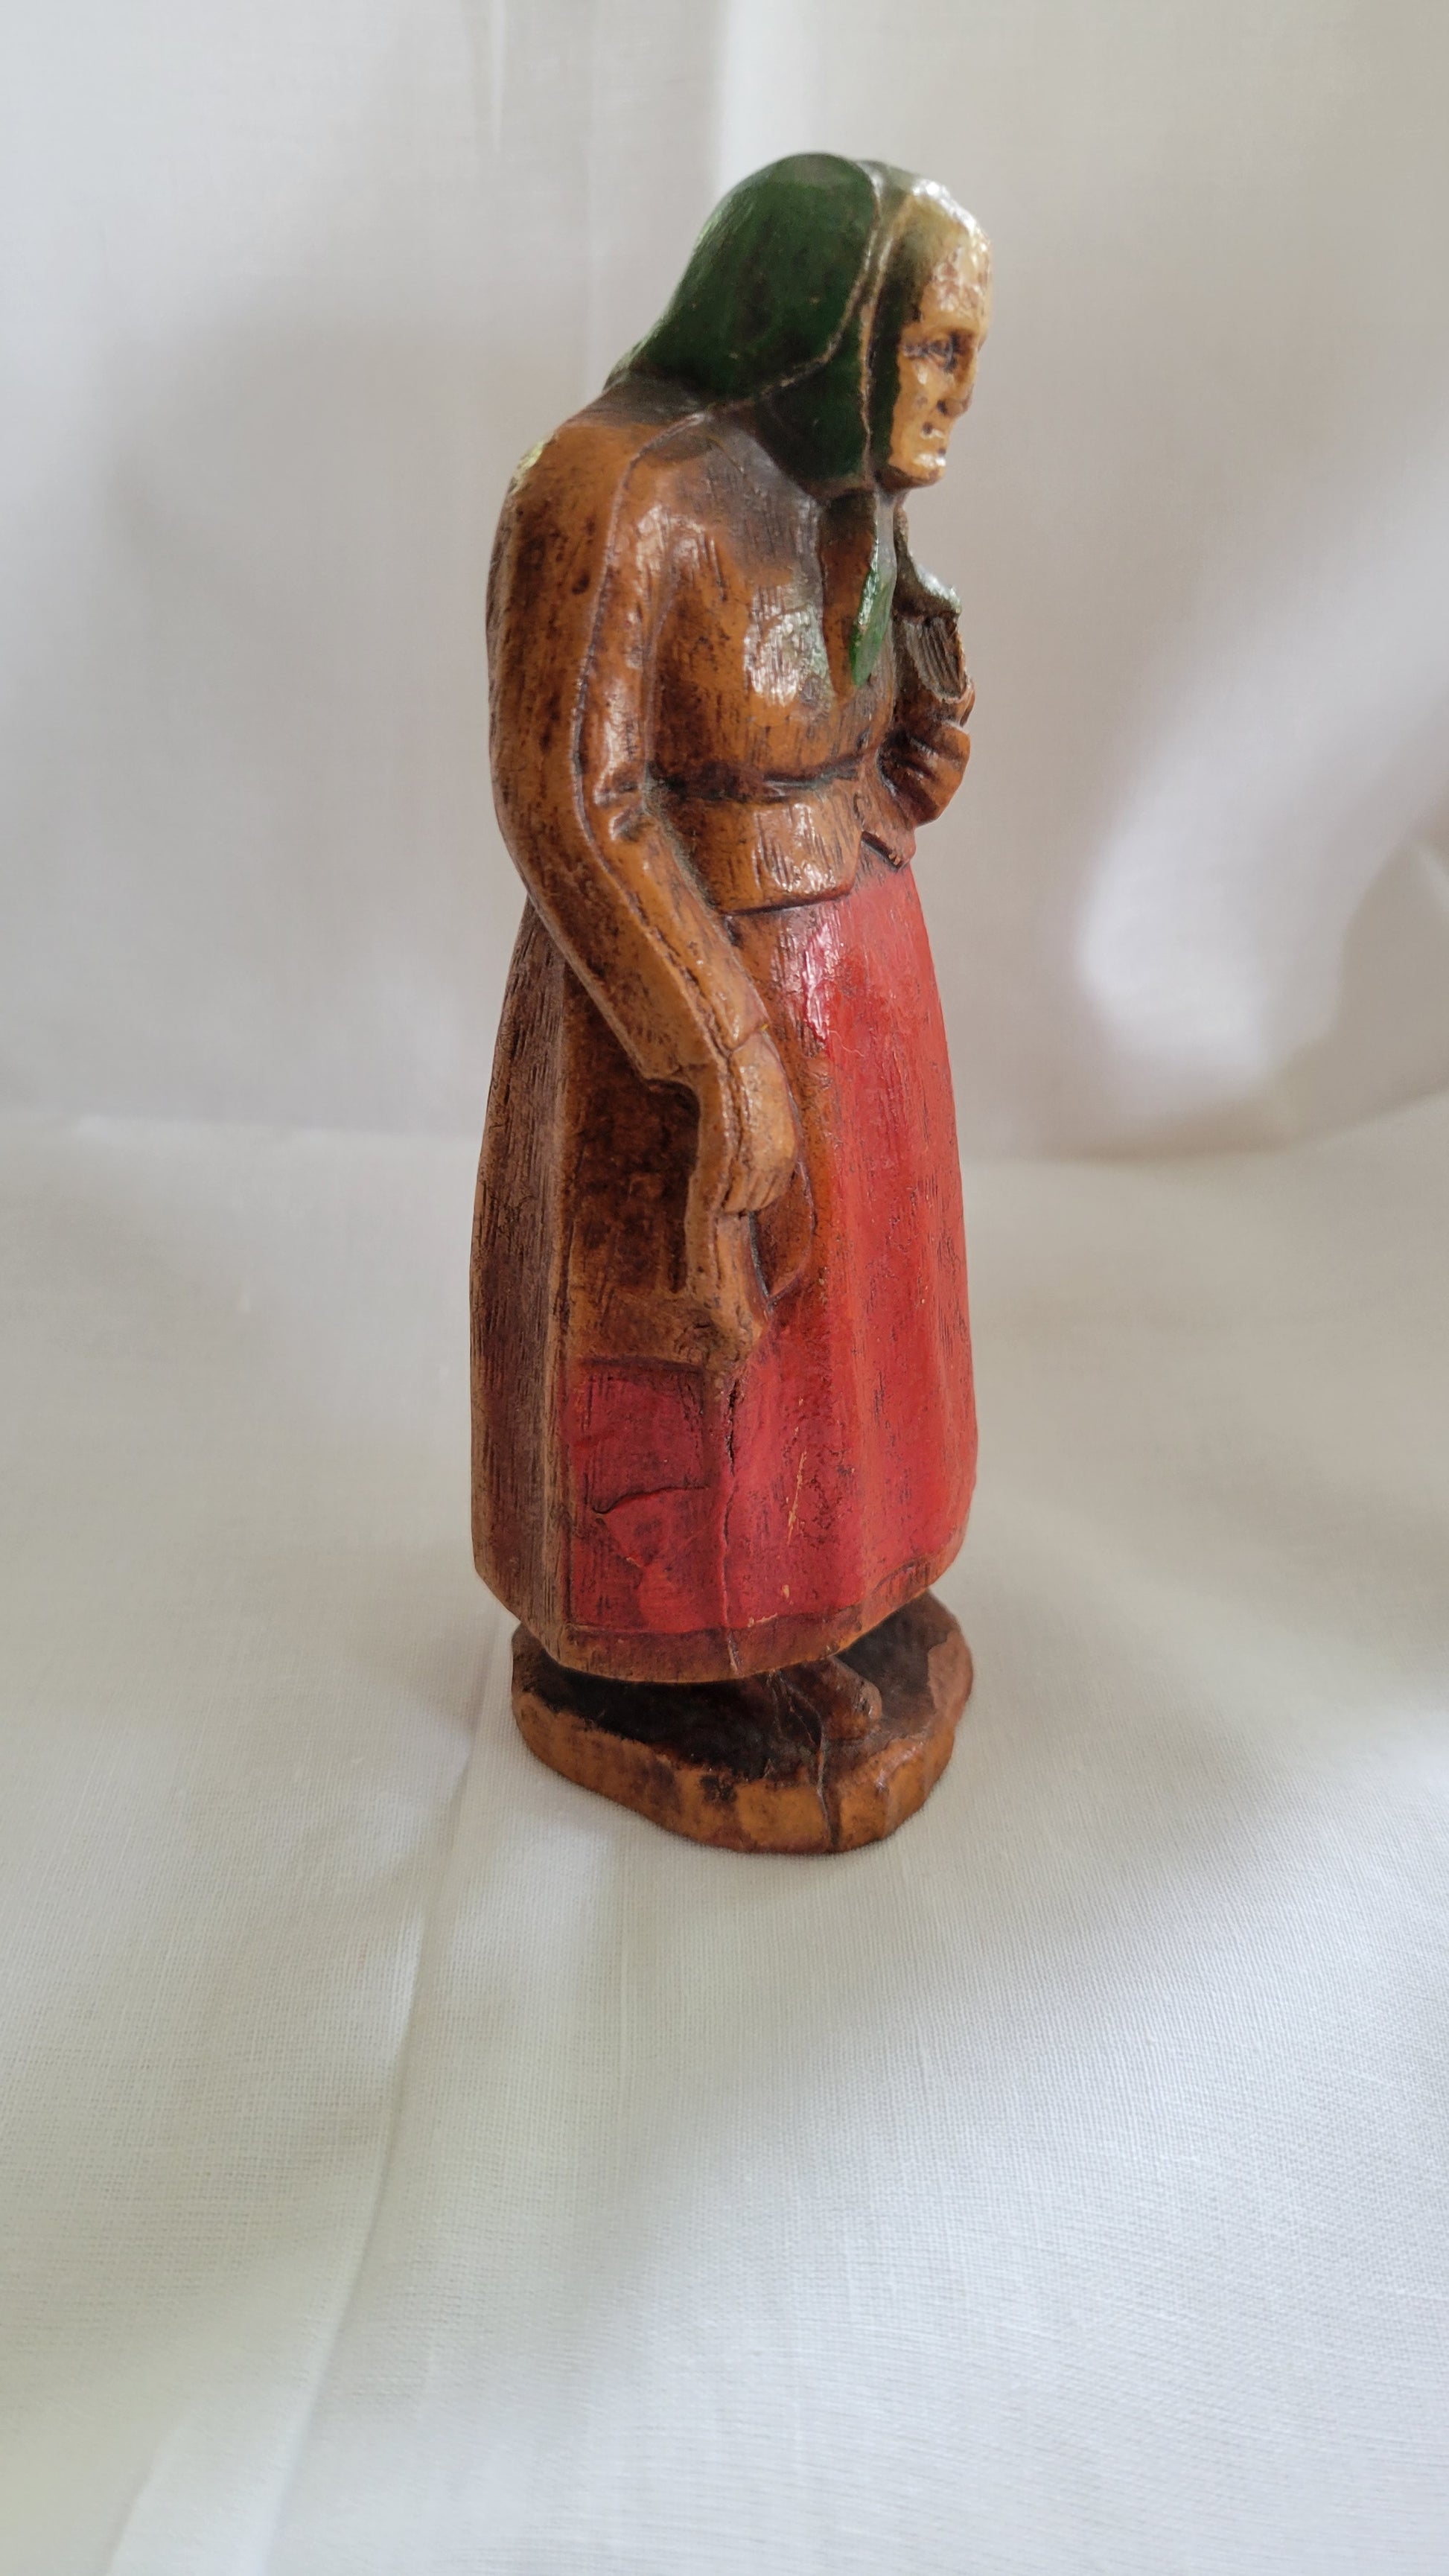 Small Jewish, Yiddish grandmother or Bubbe figure, antique, holding Jewish Bible, possibly SyrocoWood. Back view.